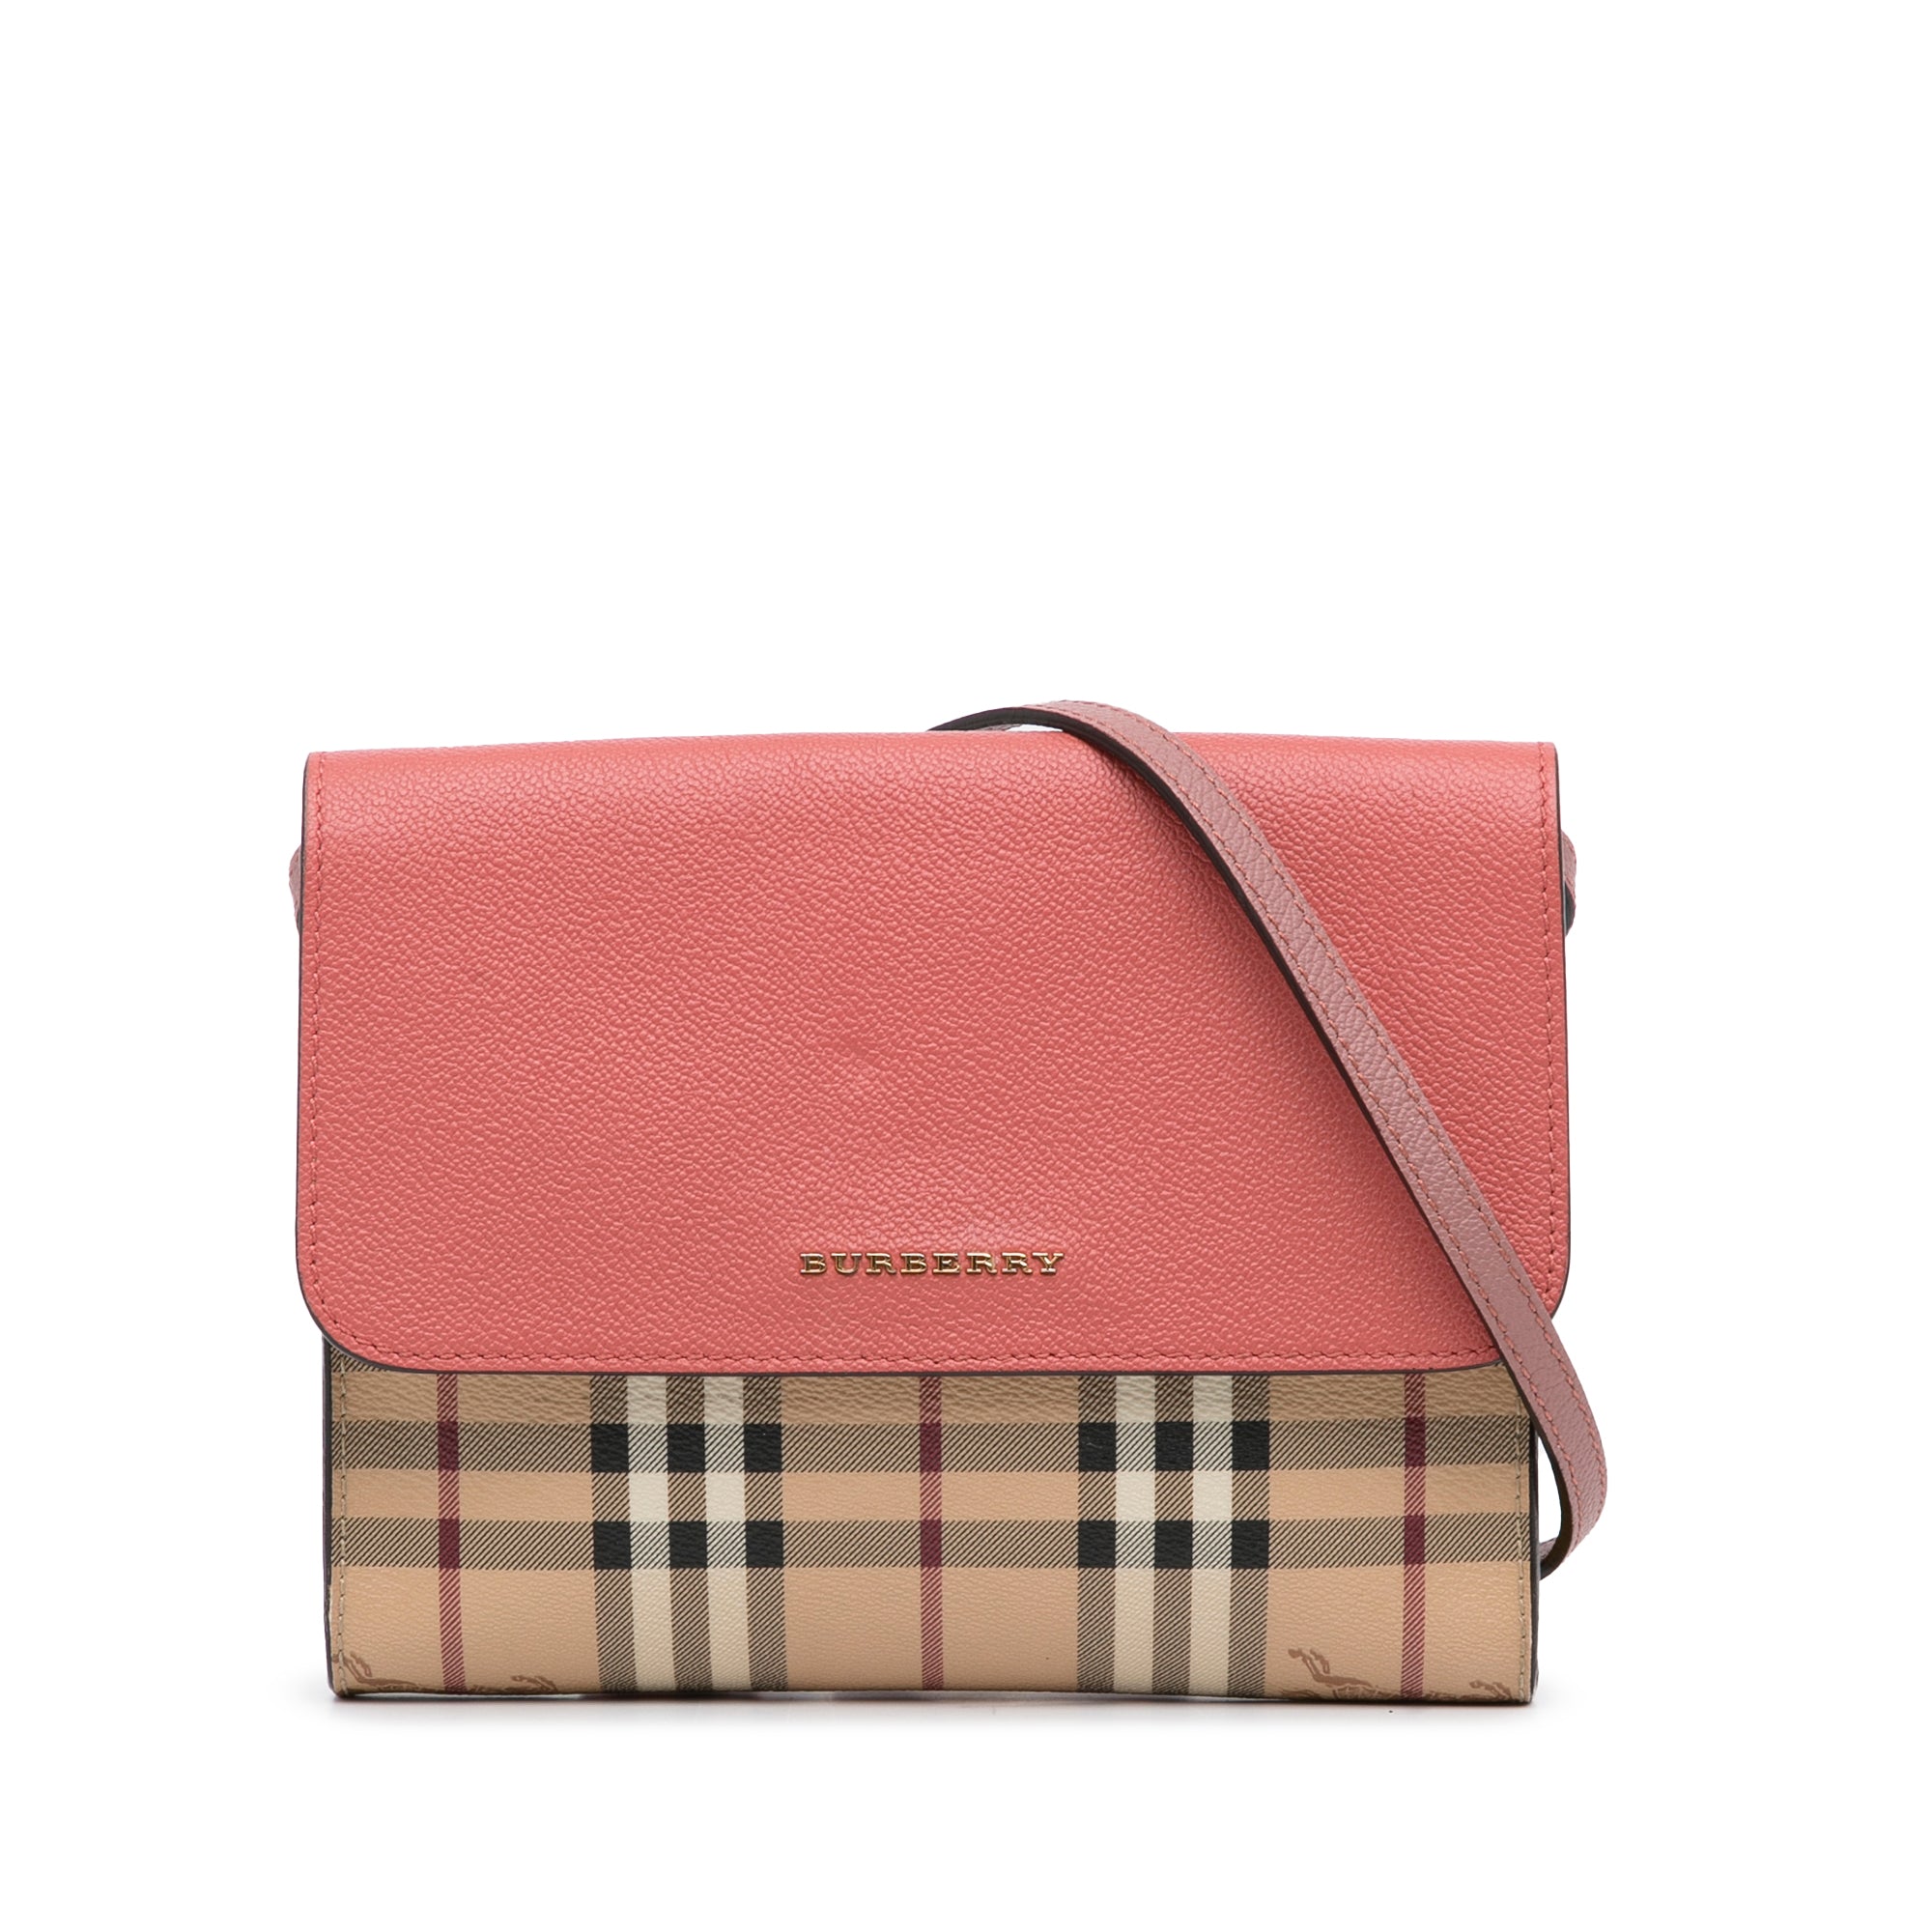 Burberry Haymarket Check Coated Canvas Tote